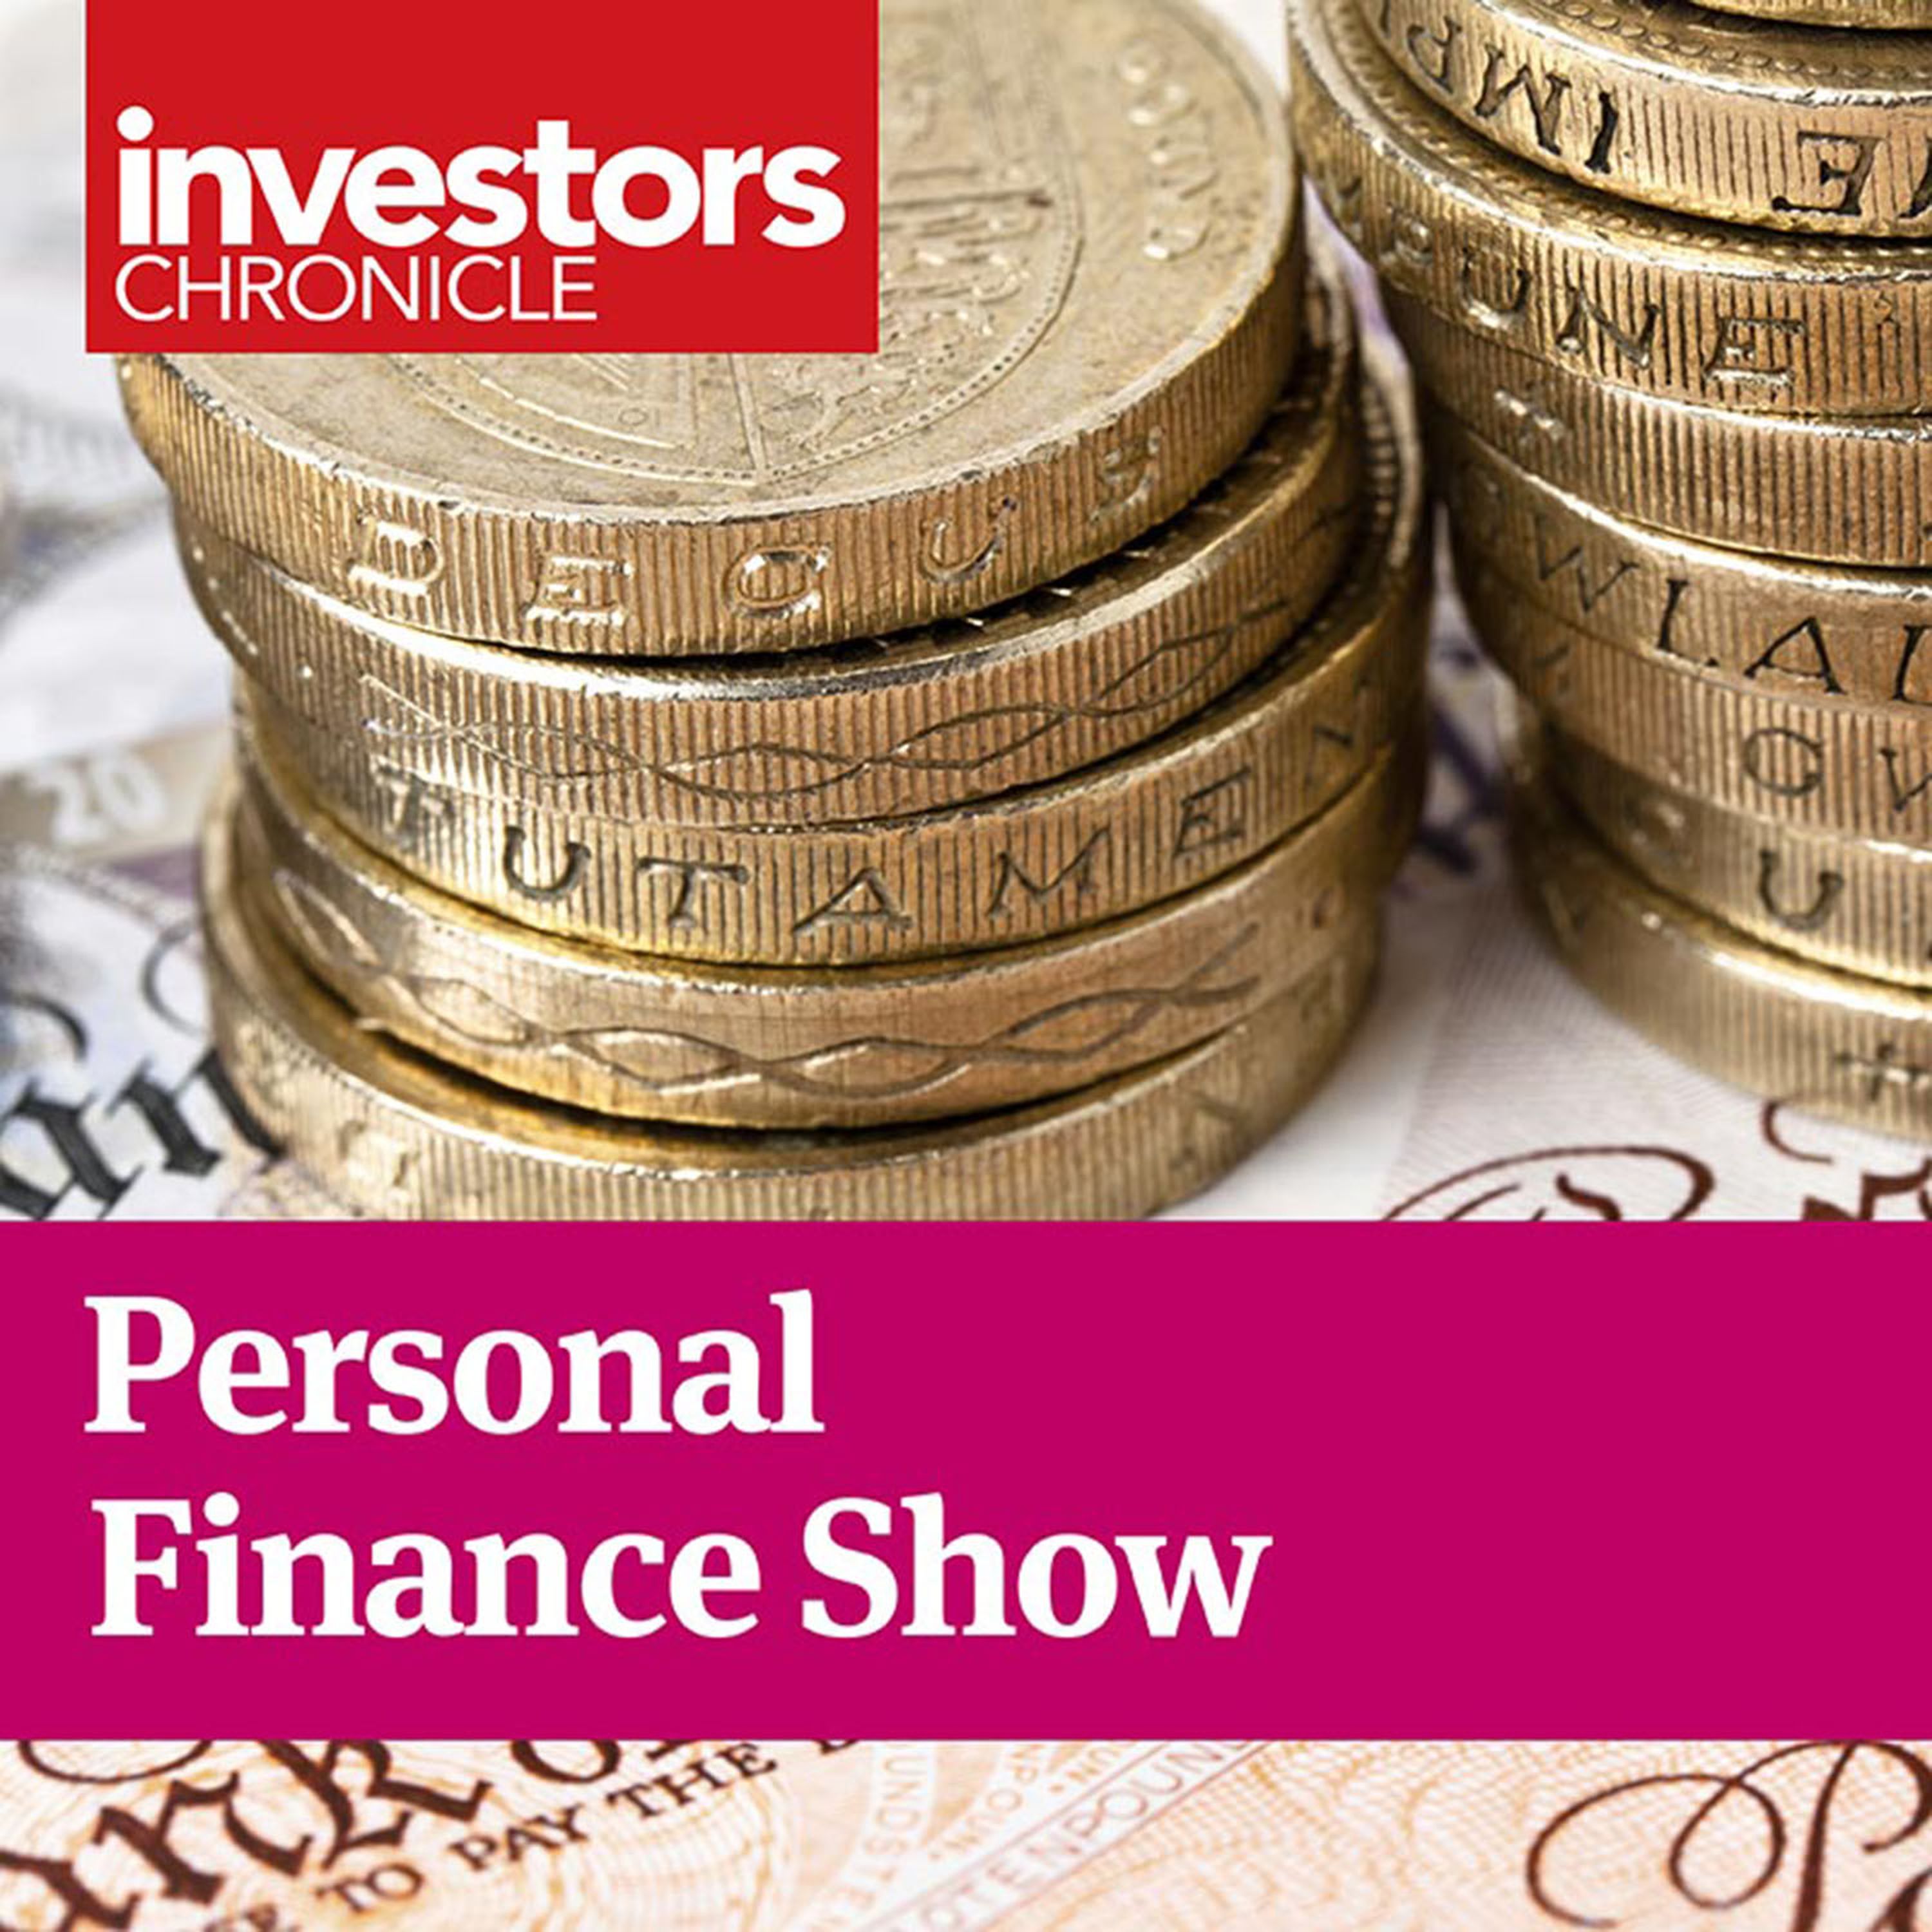 Personal Finance Show: Investment trust risks and Japan's growing income market